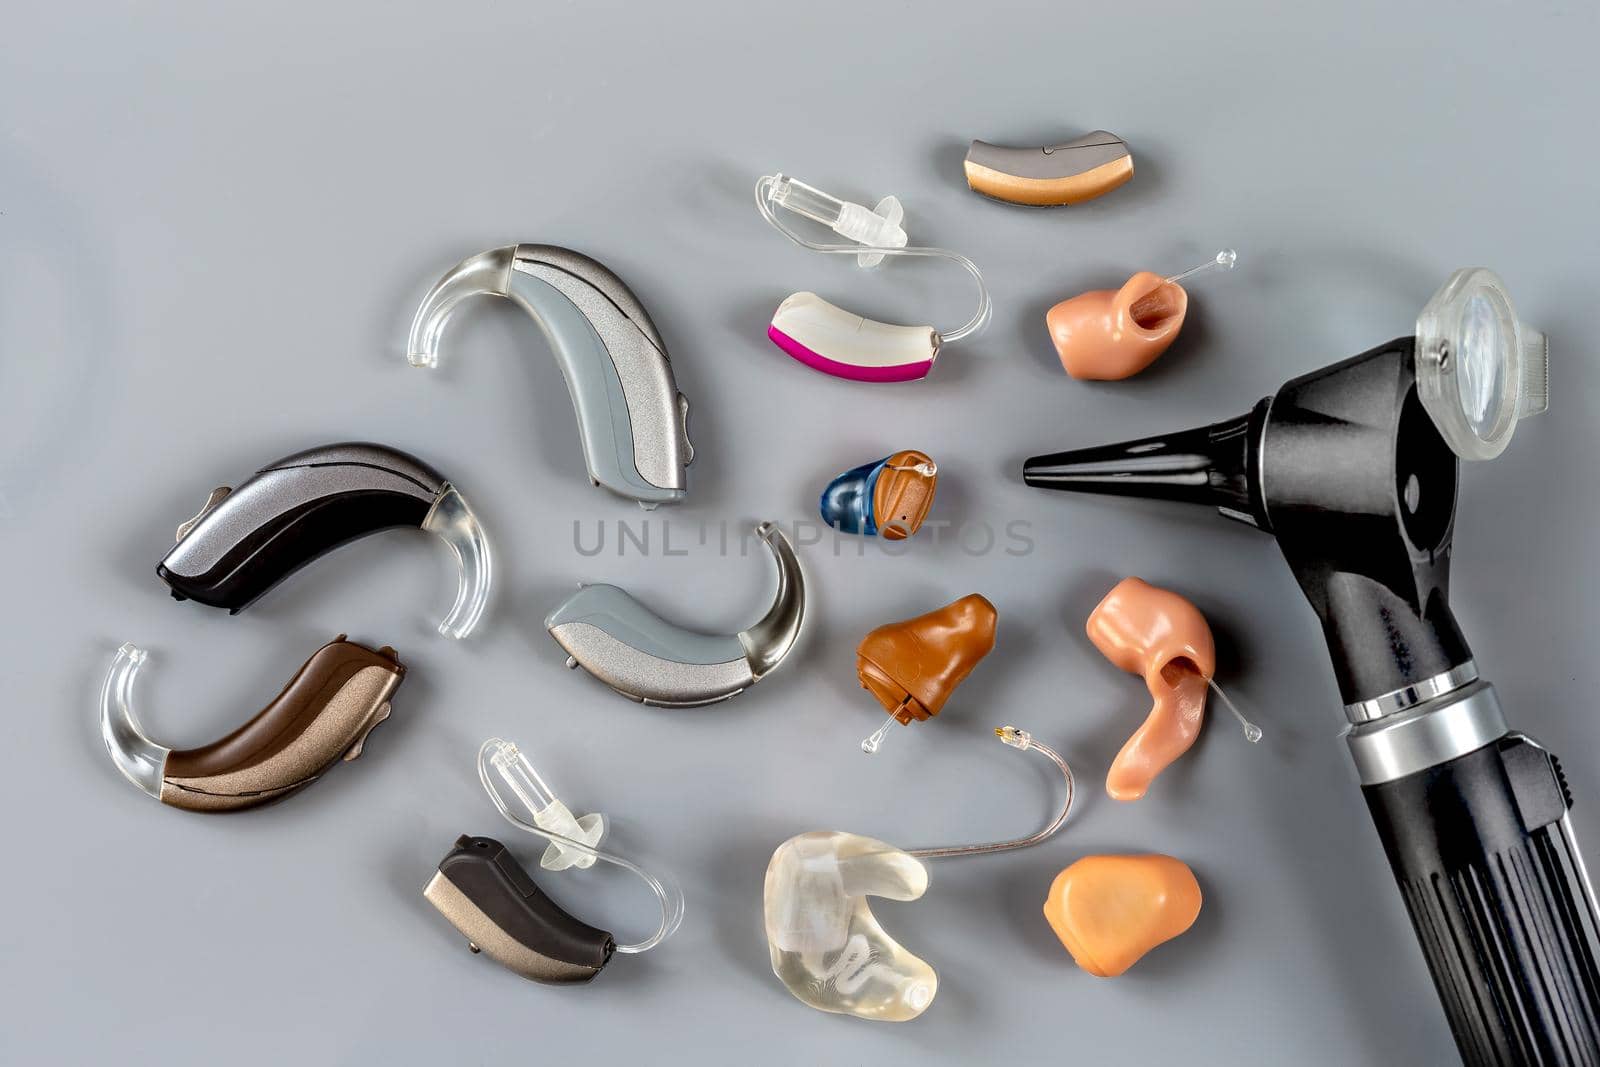 close-up view of a hearing aid and an autoscope